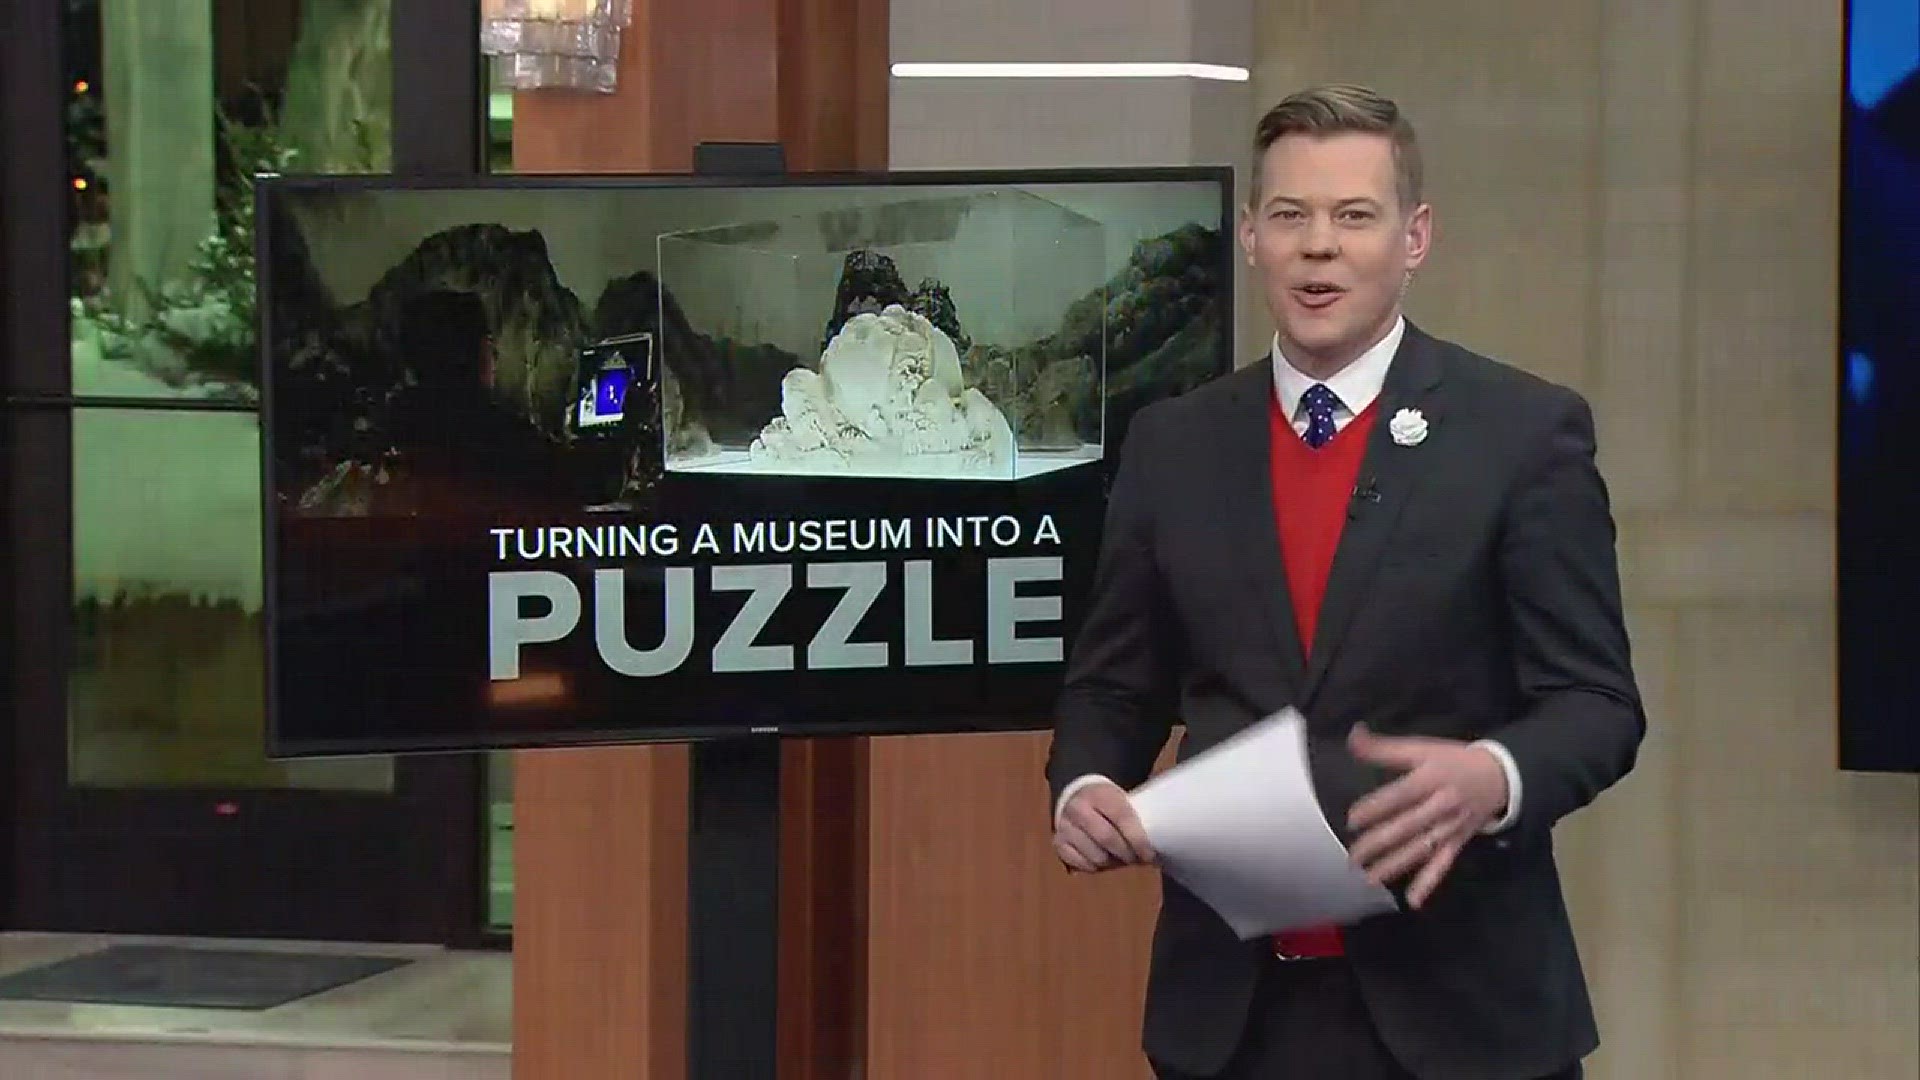 The Minneapolis Institute of Art is preparing to take the idea of puzzle or escape roomers to an entirely new level. It's all thanks to a big cash prize and some tech savvy archeologists.